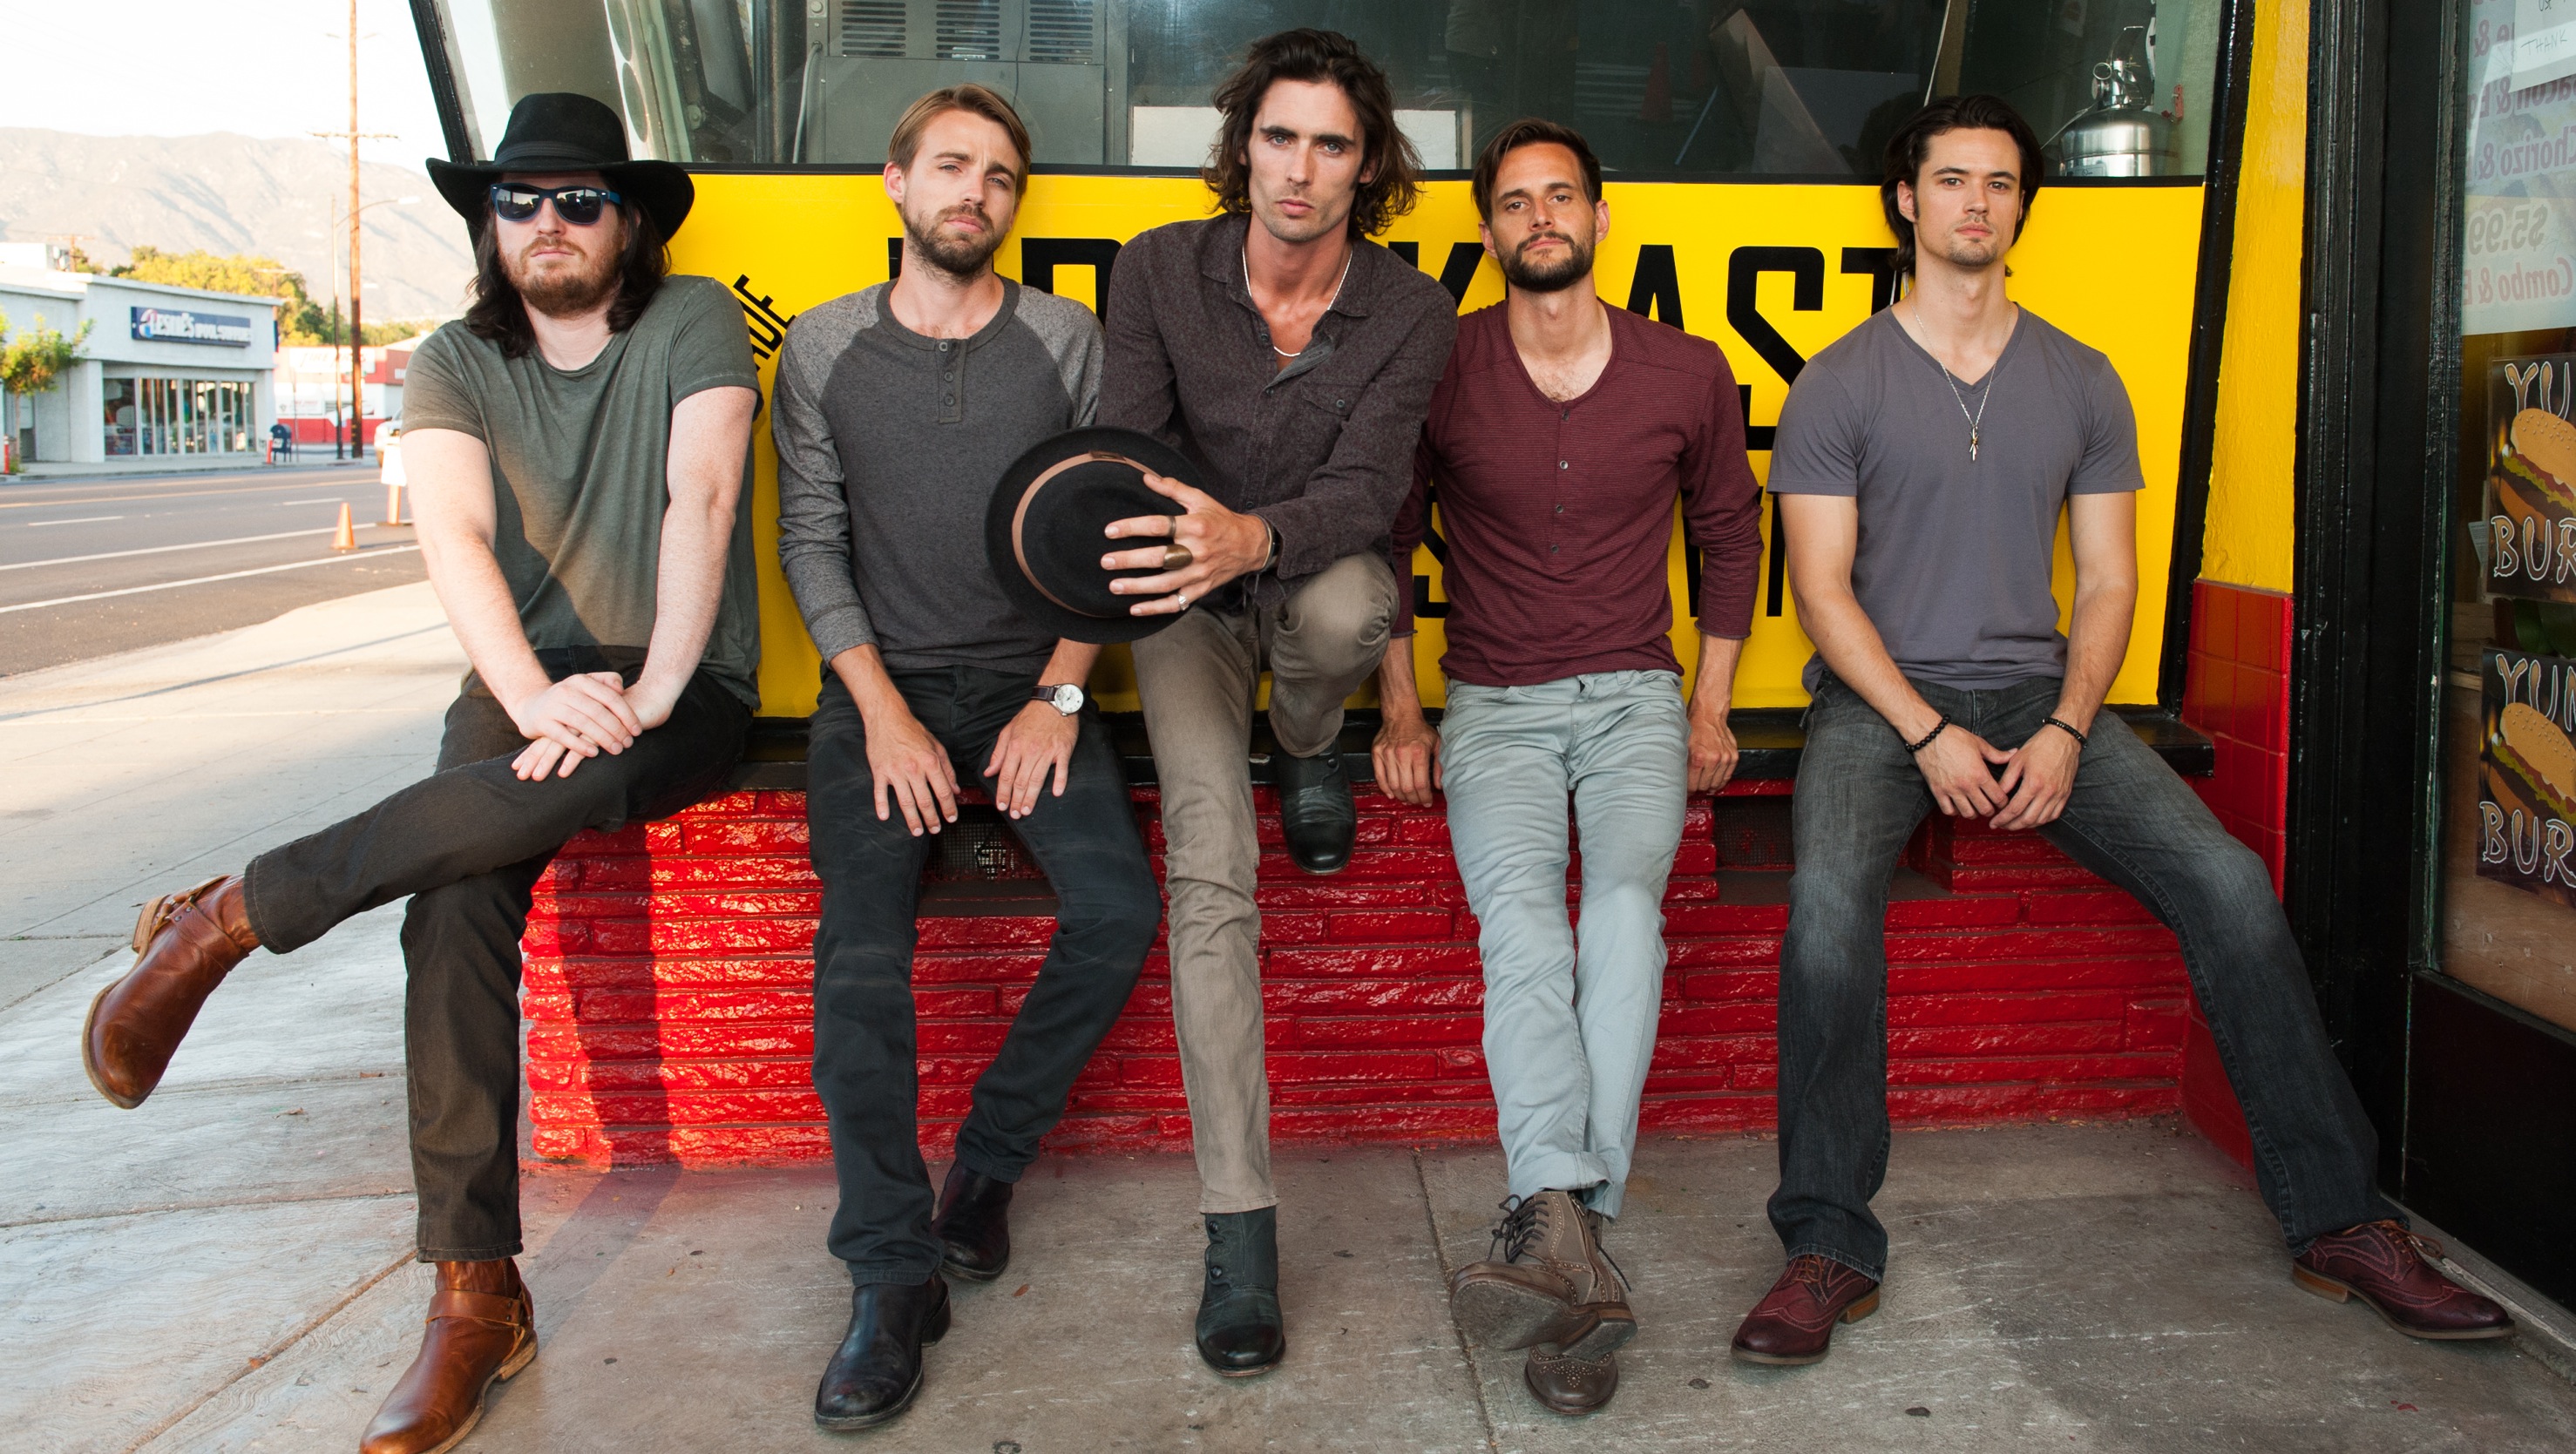 Matthew Atkinson as drummer for band Ashes Of Rome on NBC's 'Parenthood', with Tyson Ritter (All American Rejects).